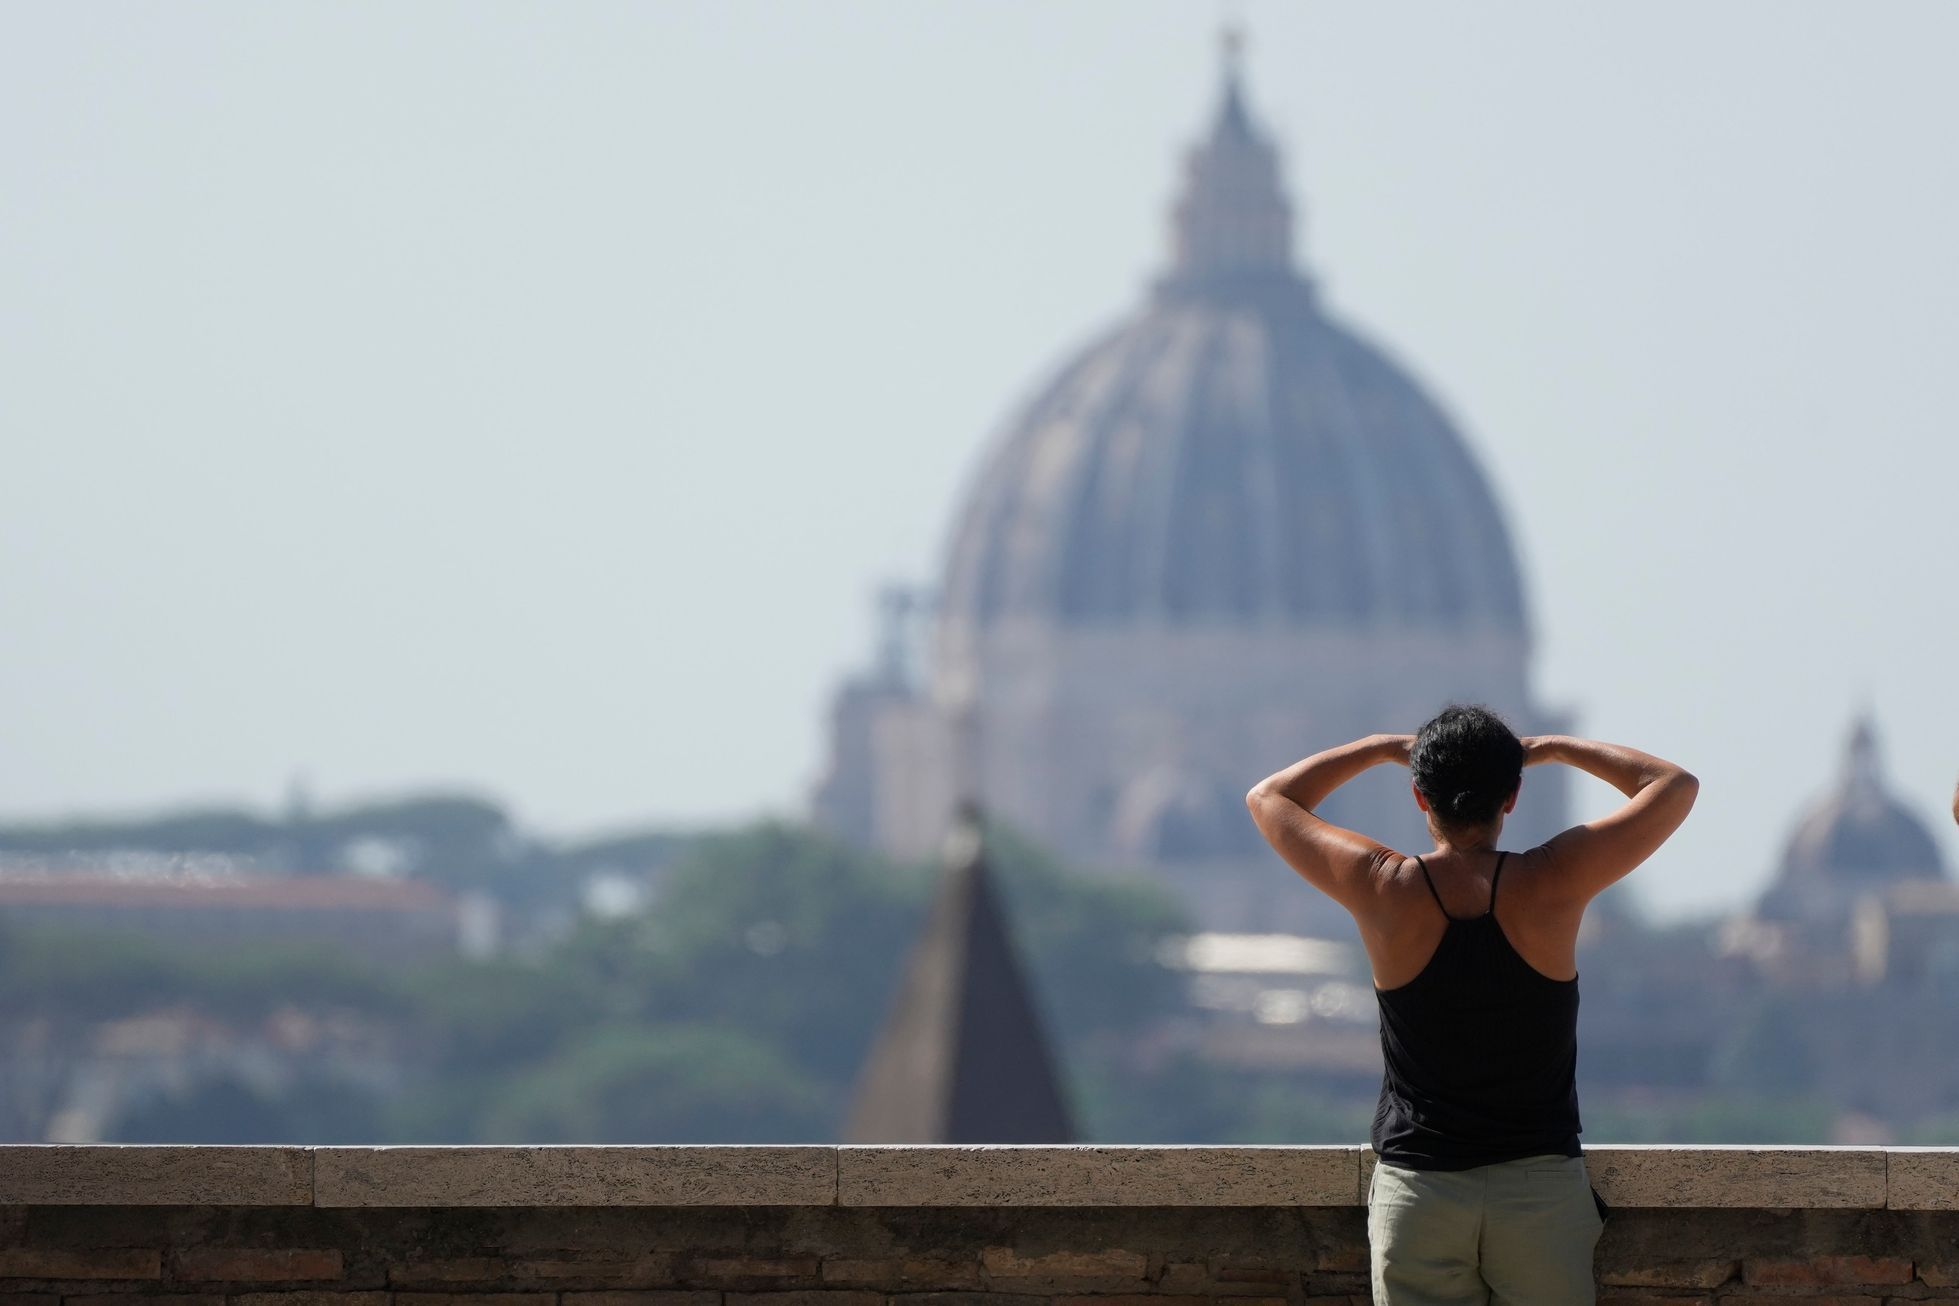 Be careful in Rome and Florence, the Italian government warns of hot weather.  Even healthy people are at risk